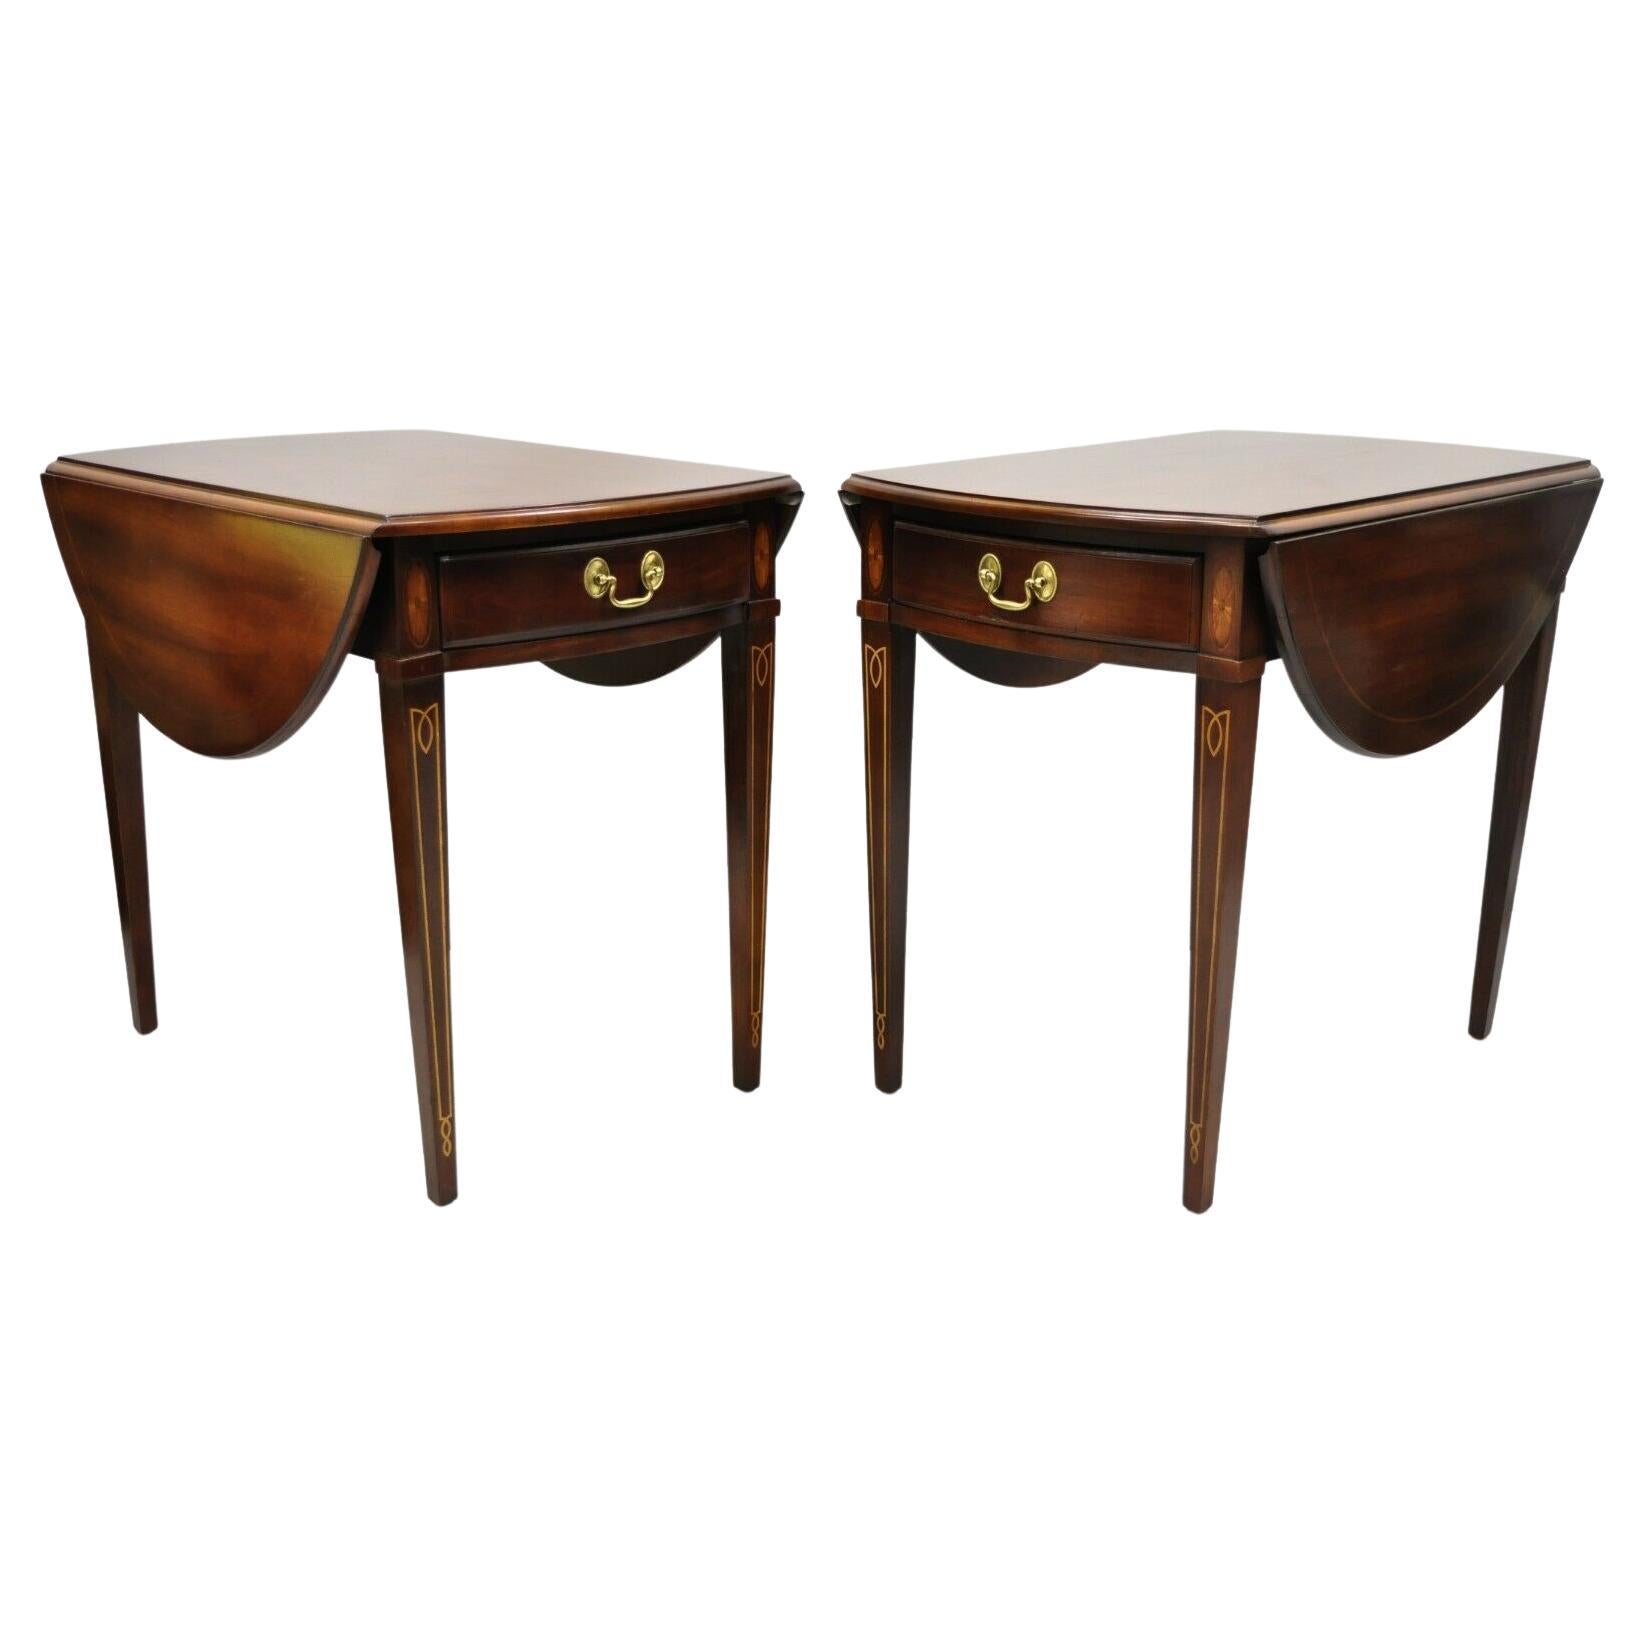 Federal Sheraton Mahogany Pembroke Side Table with Inlay by Hammary, a Pair